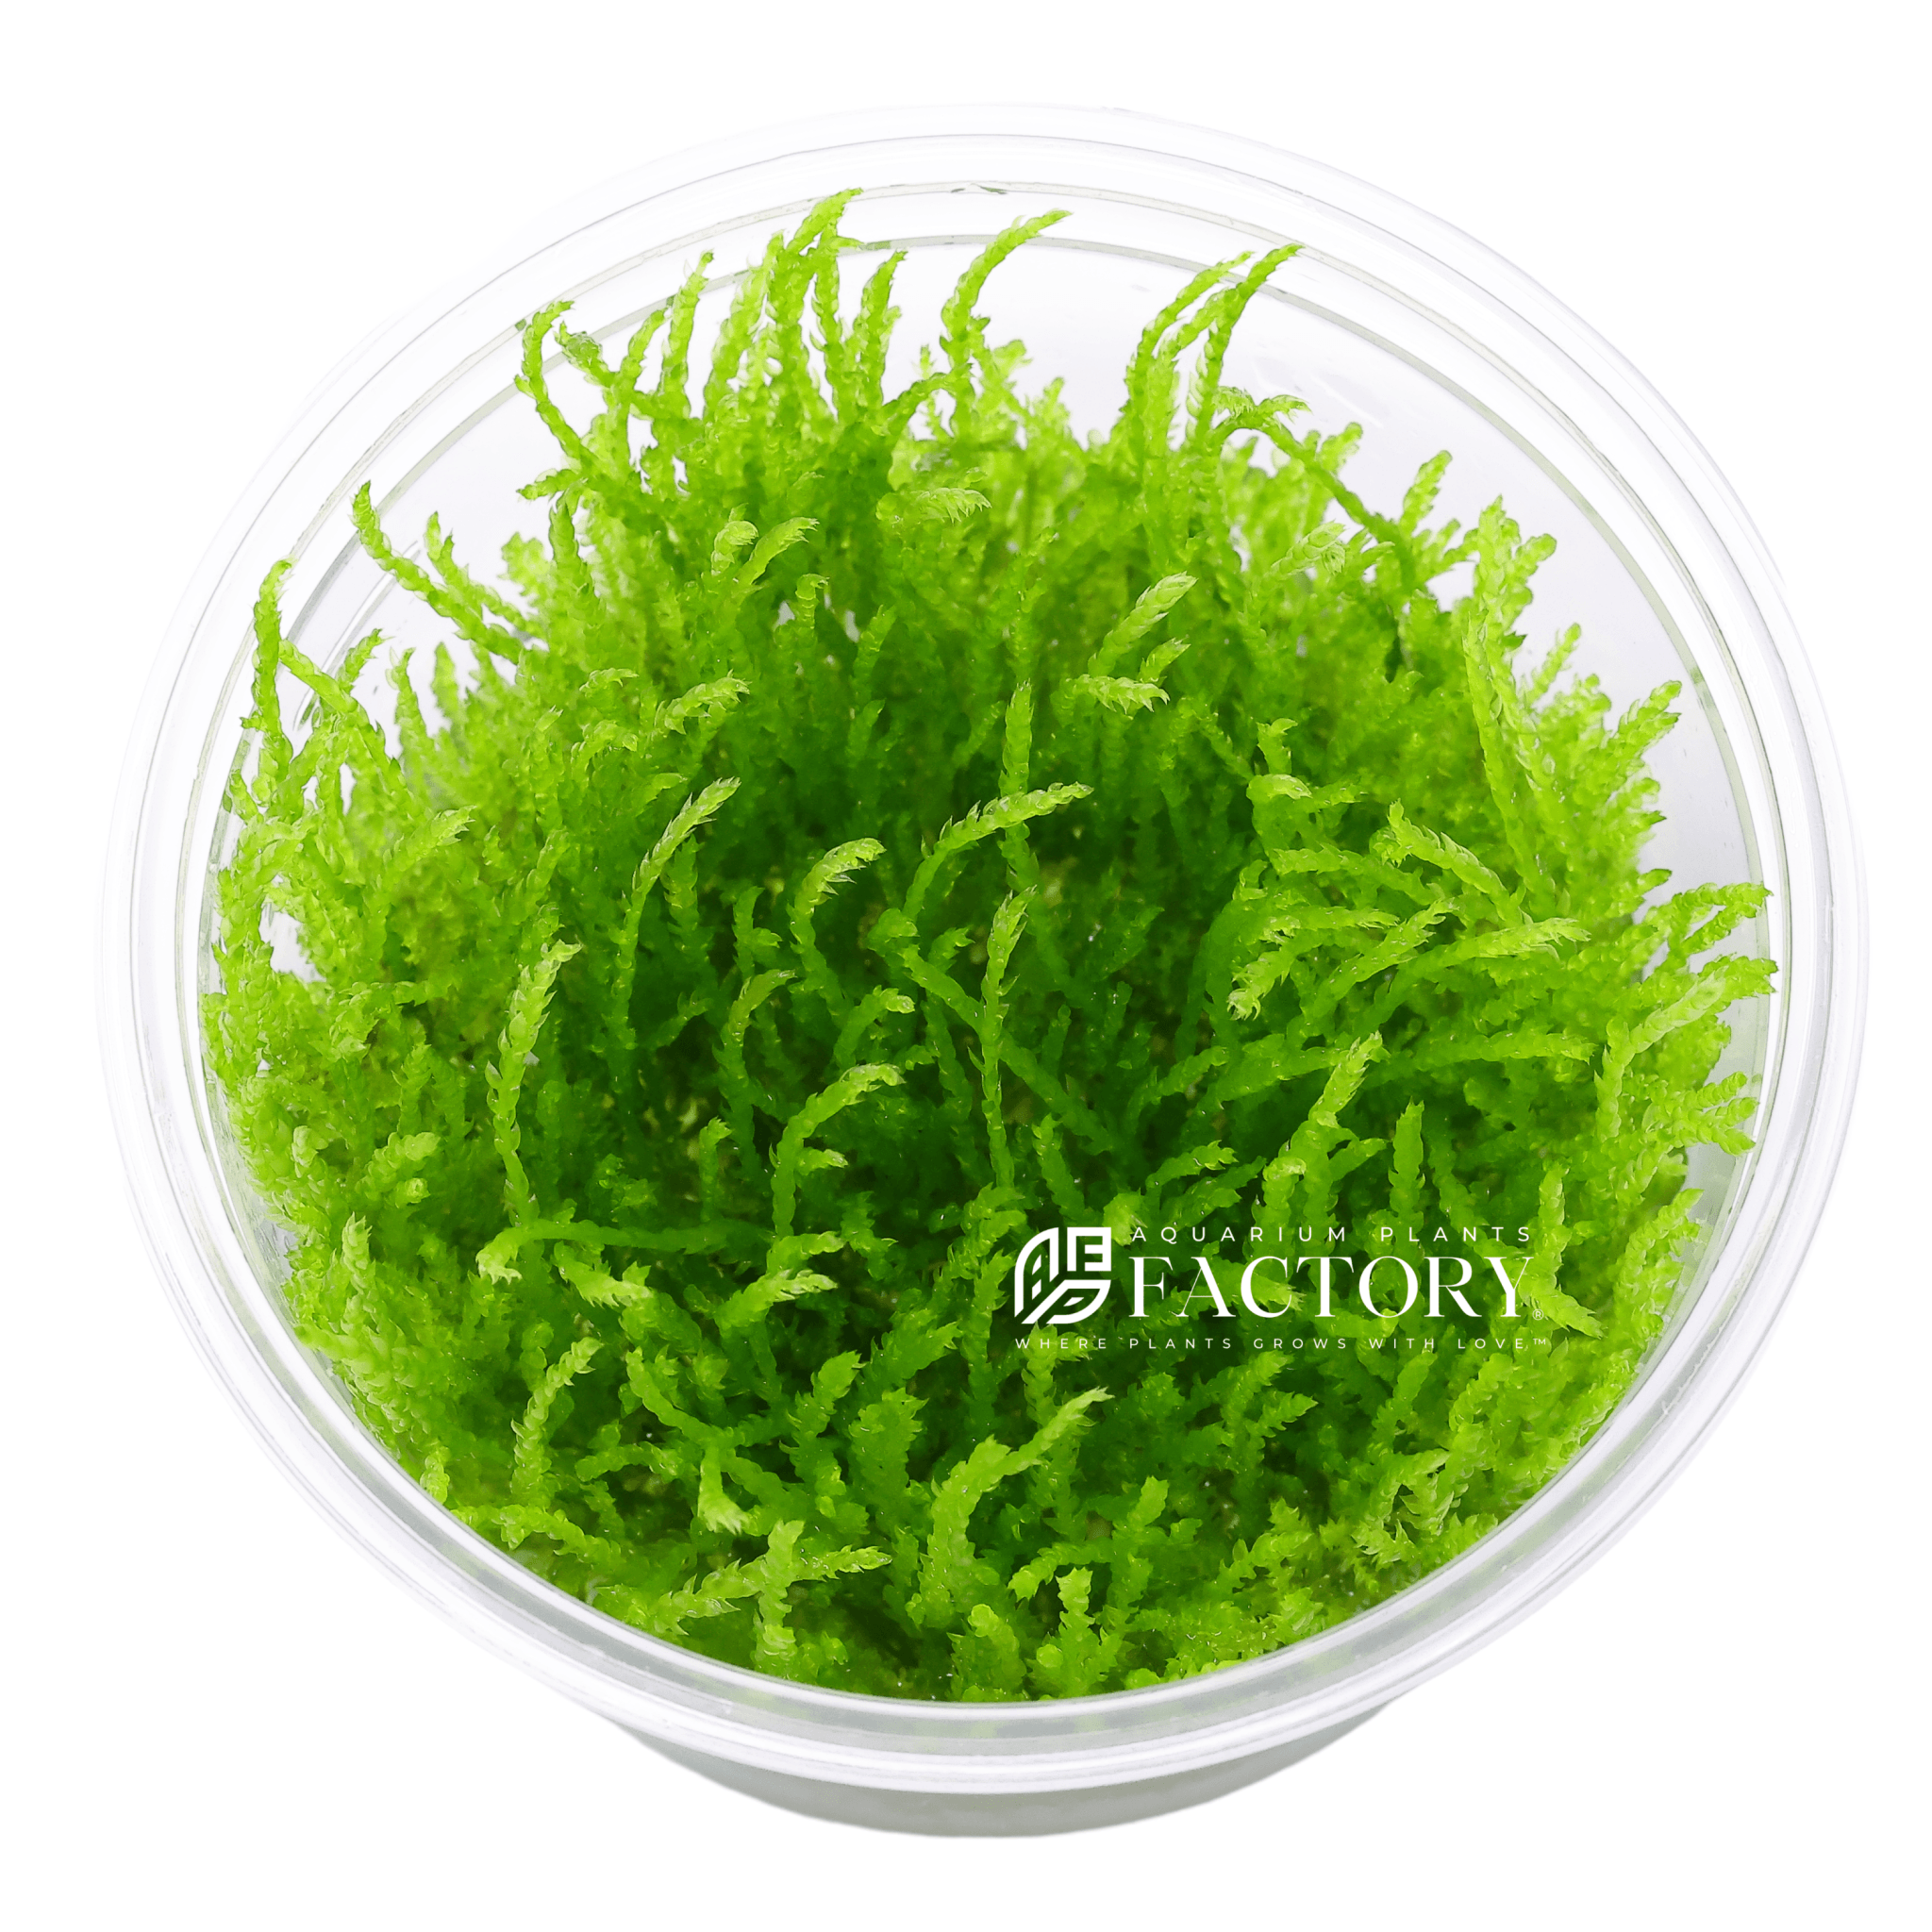 Weeping Moss Tissue Culture